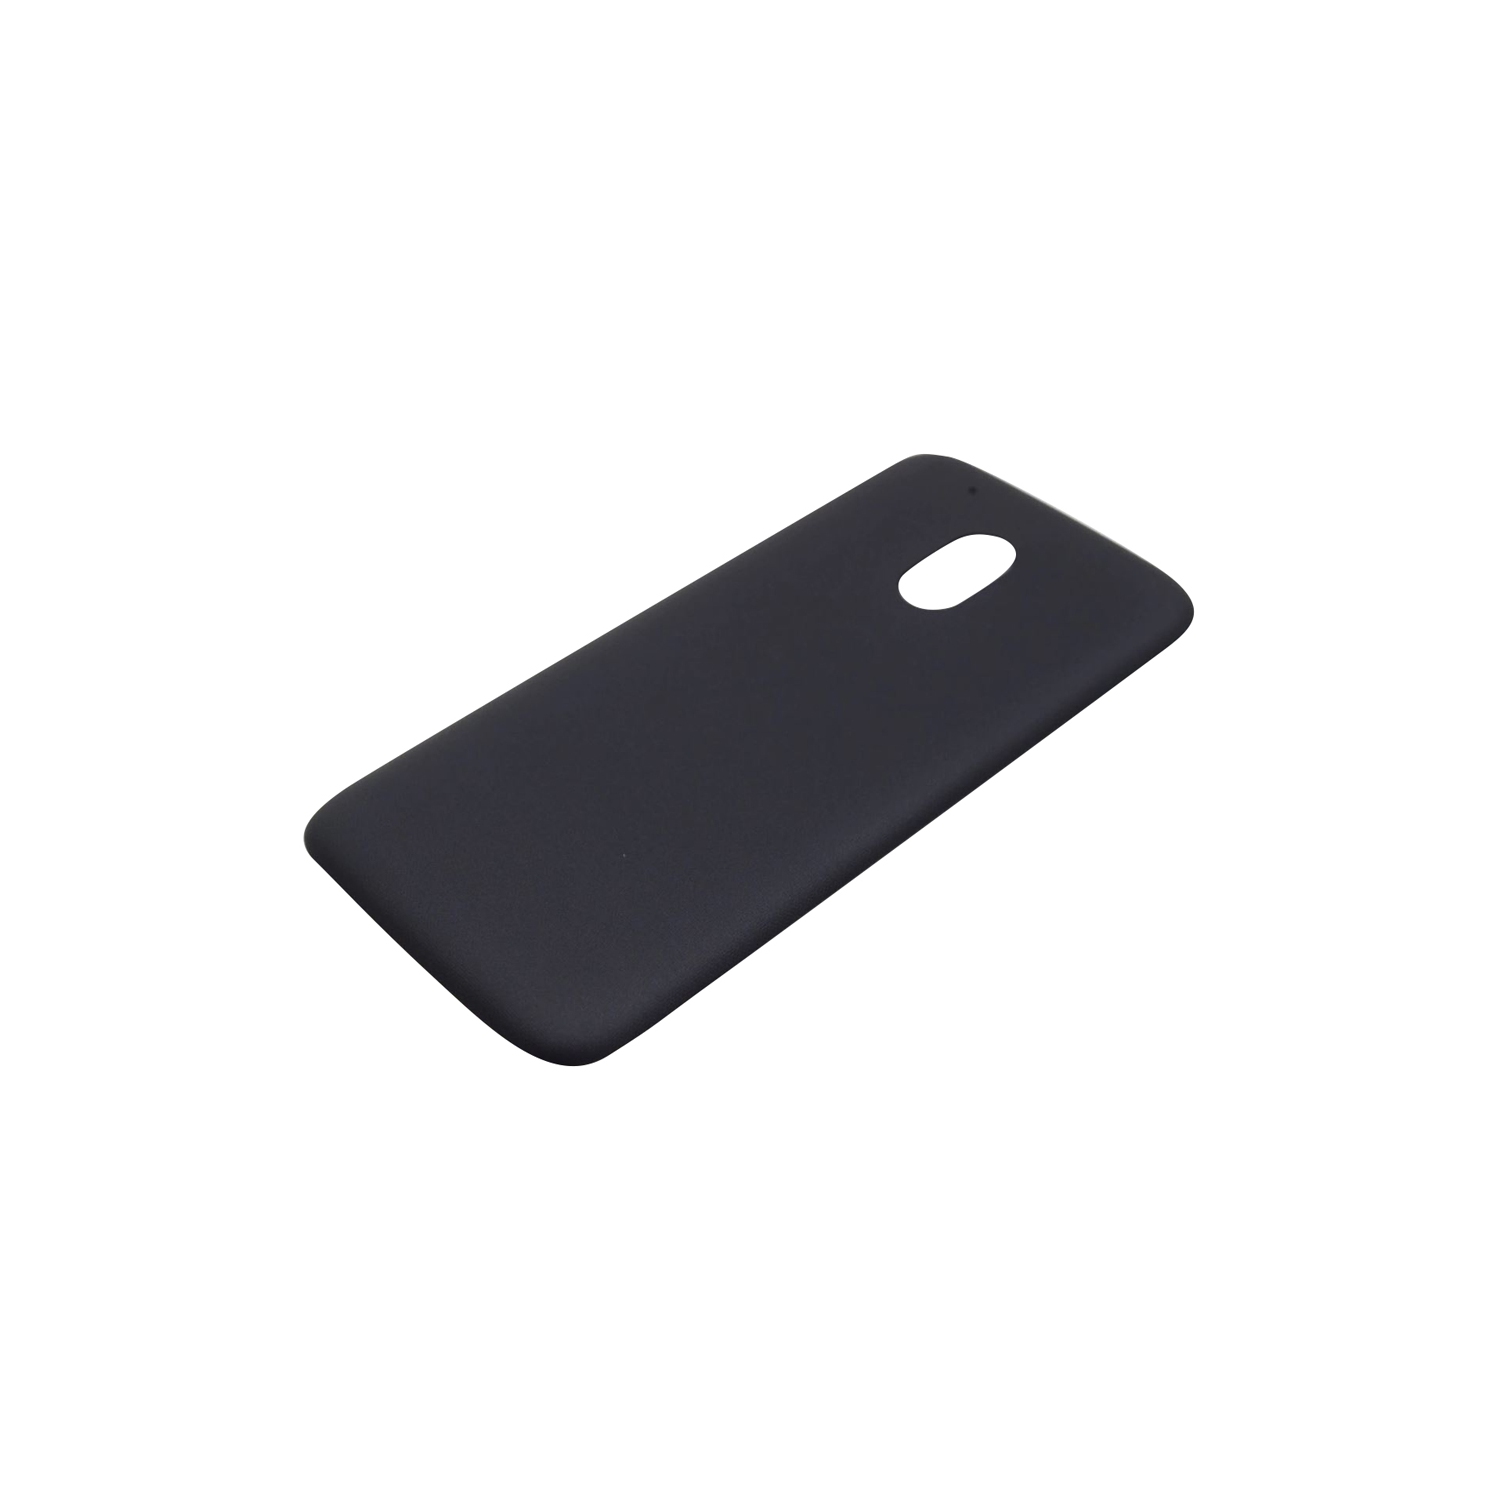 Replacement Battery Back Housing Cover Compatible With Motorola Moto G4 Plus - Black